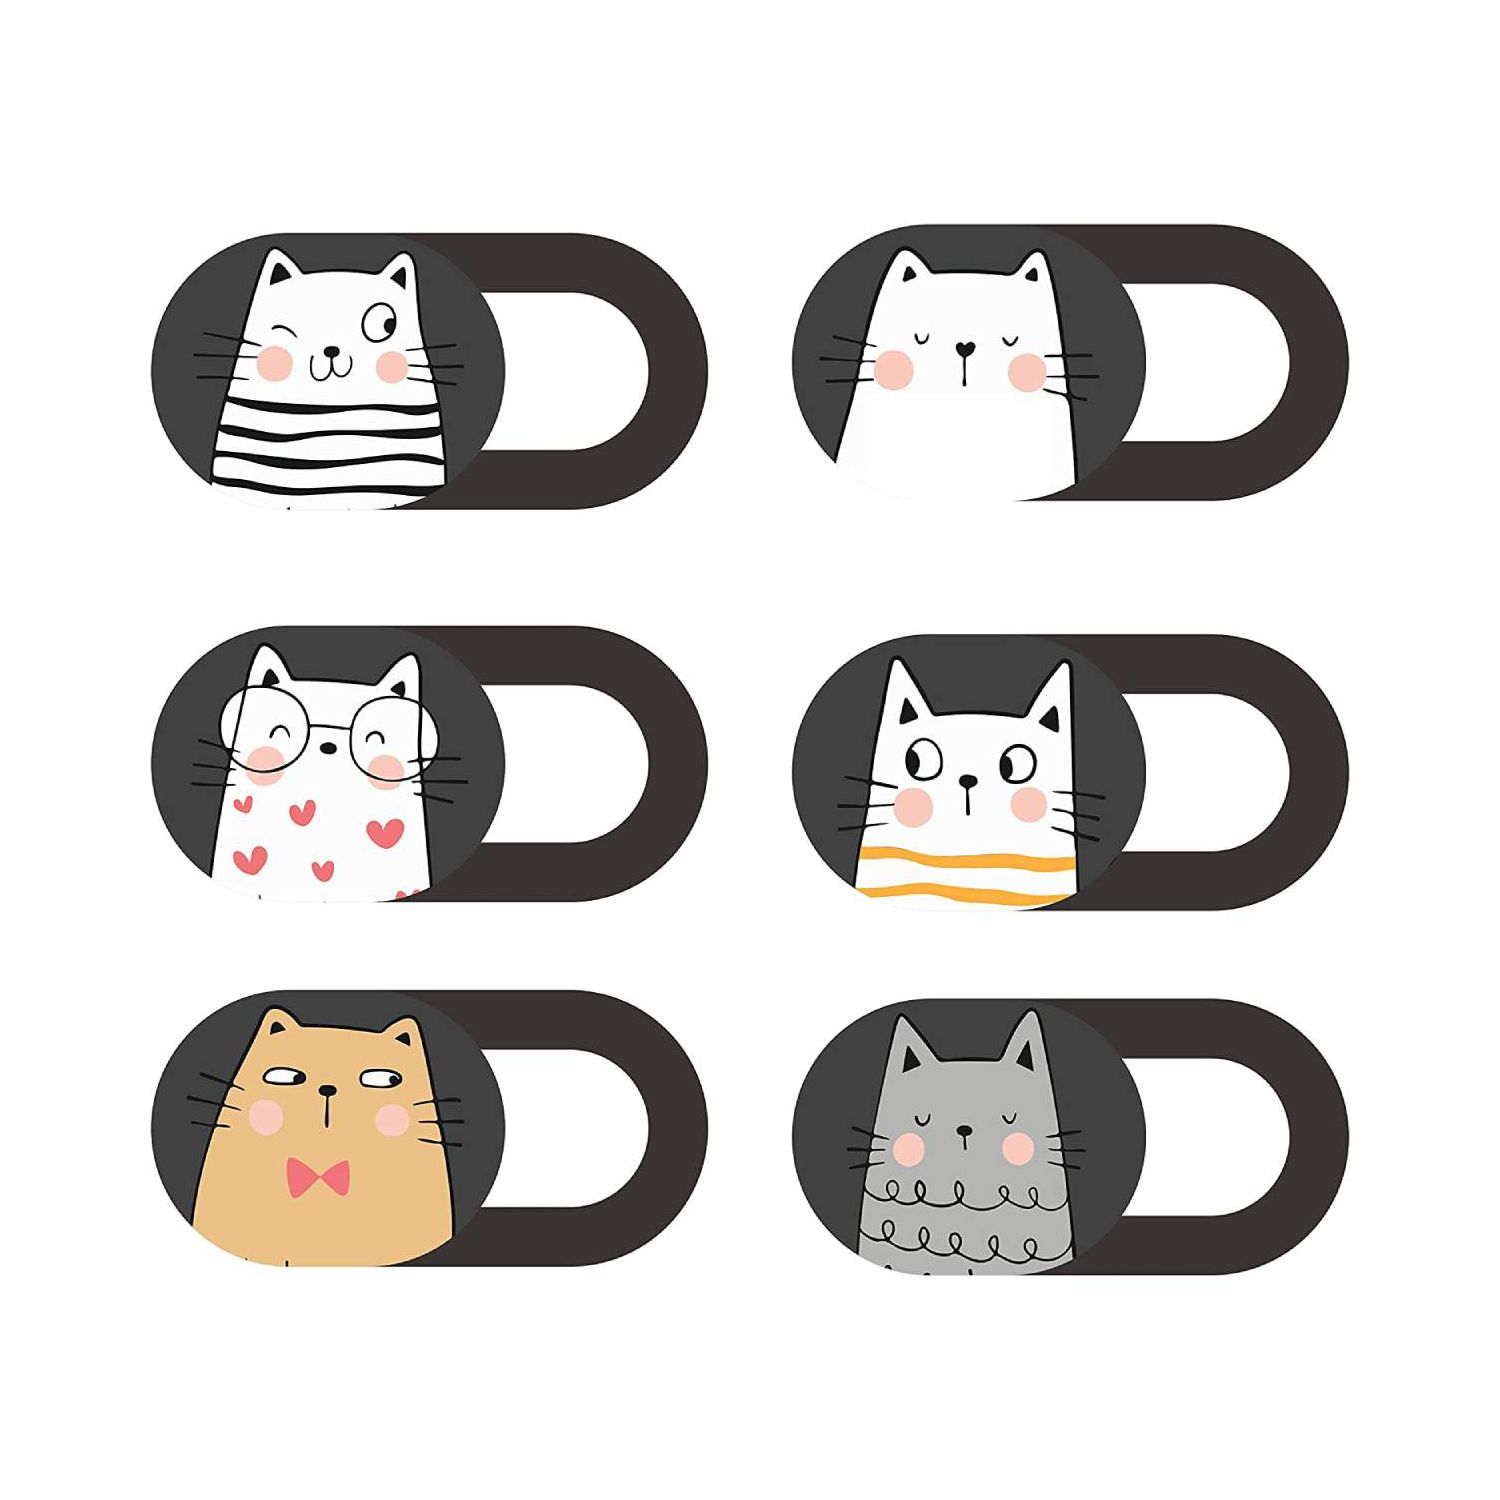 https://mesmos.co/wp-content/uploads/2021/10/cat-webcam-covers-resize.jpg